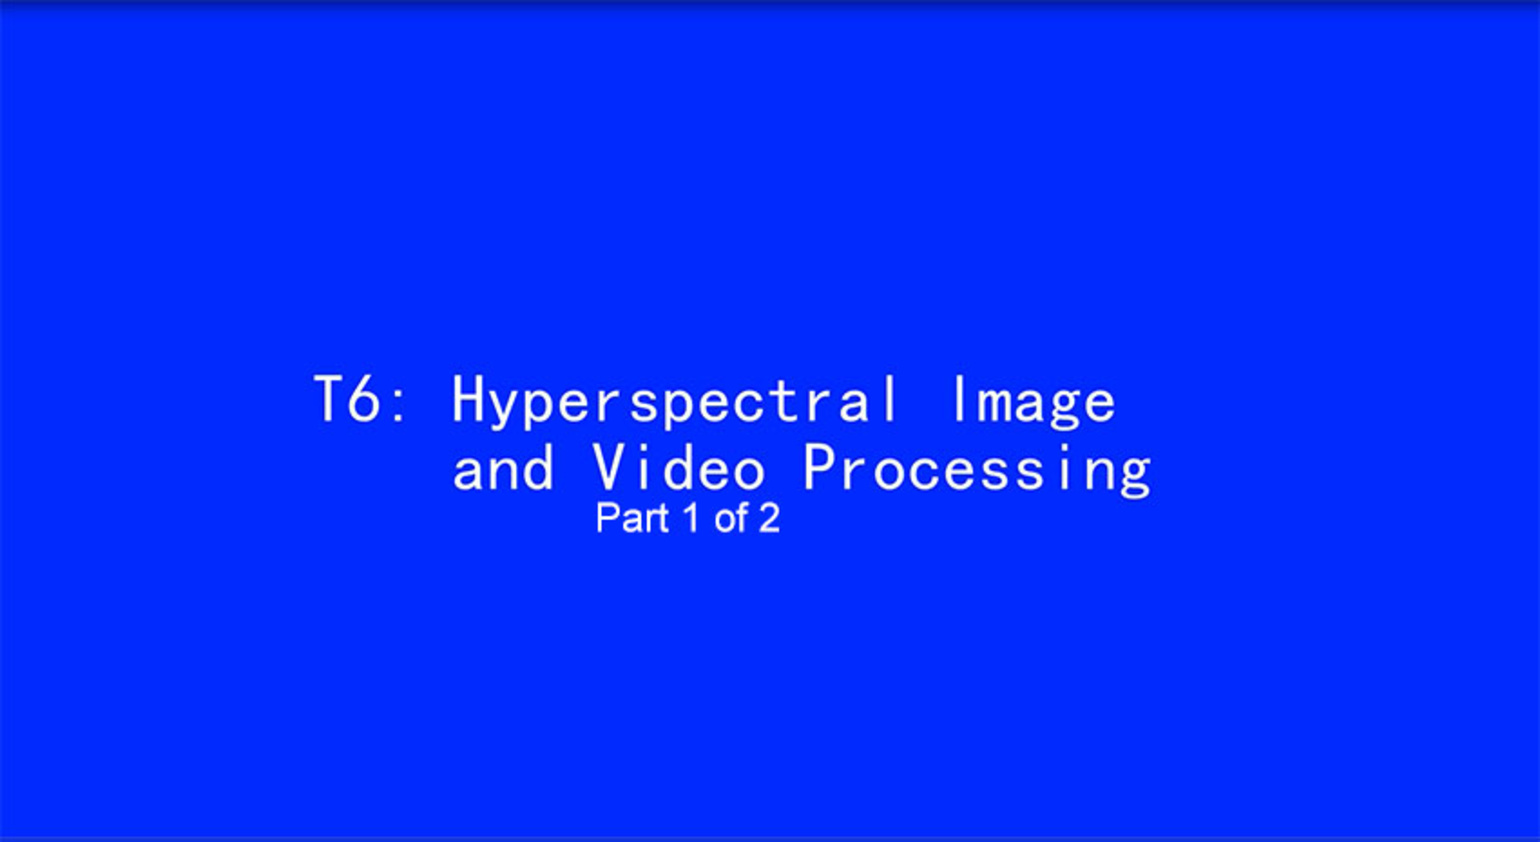 ICIP 2017 Tutorial - Hyperspectral Image and Video Processing [Part 1 of 2]